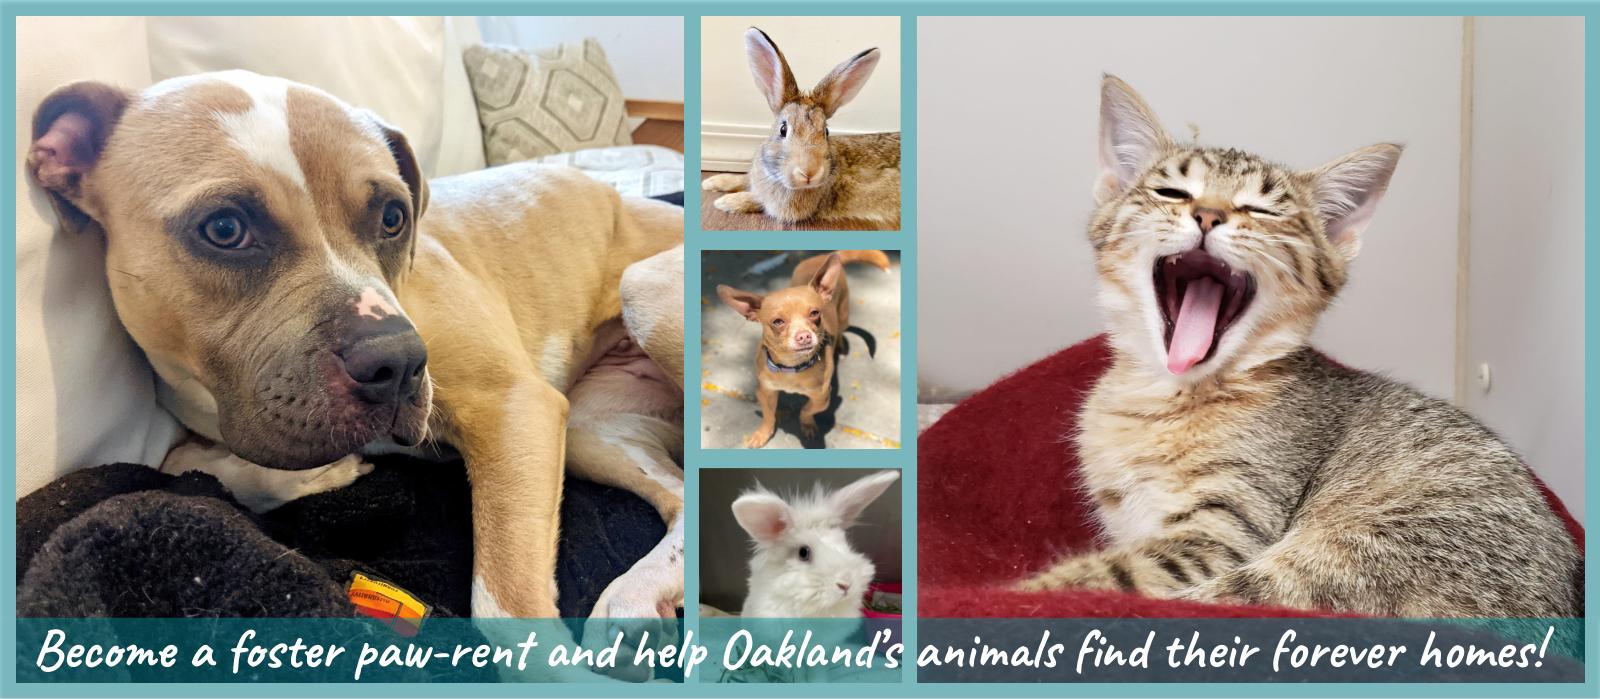 Fosters needed! Help Oakland’s animals find their fur-ever homes!